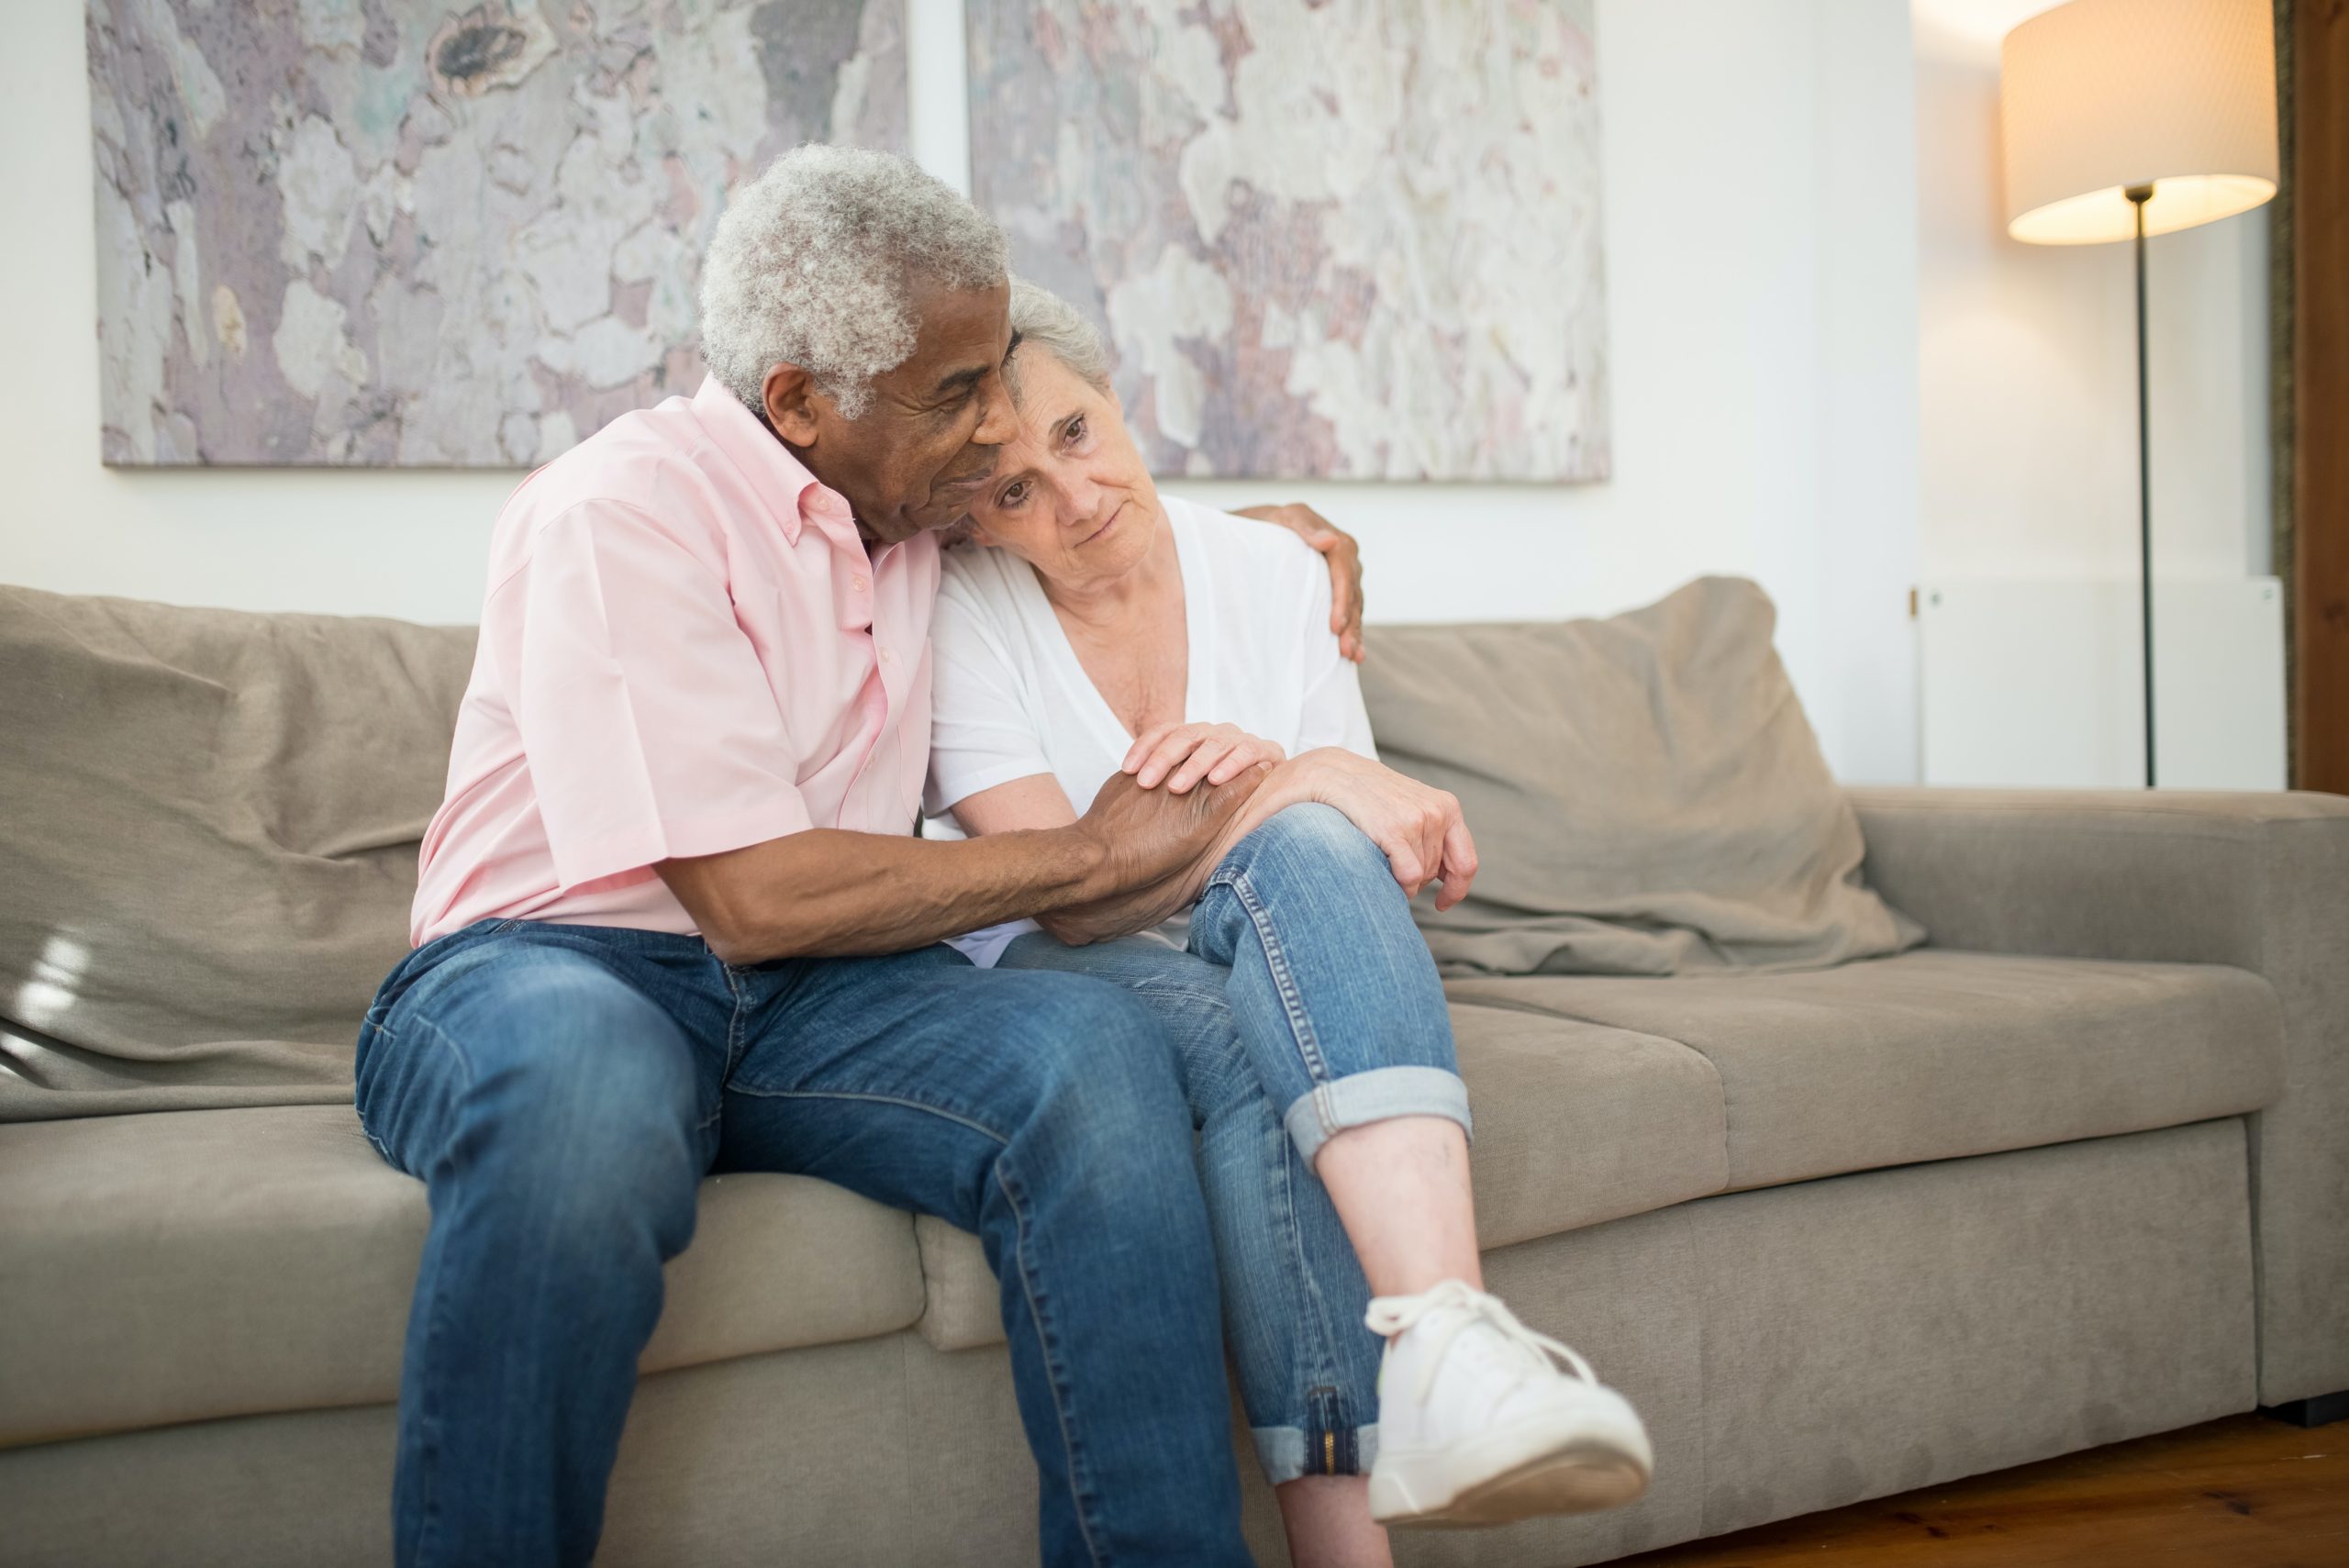 man comforting a woman while they sit on a couch